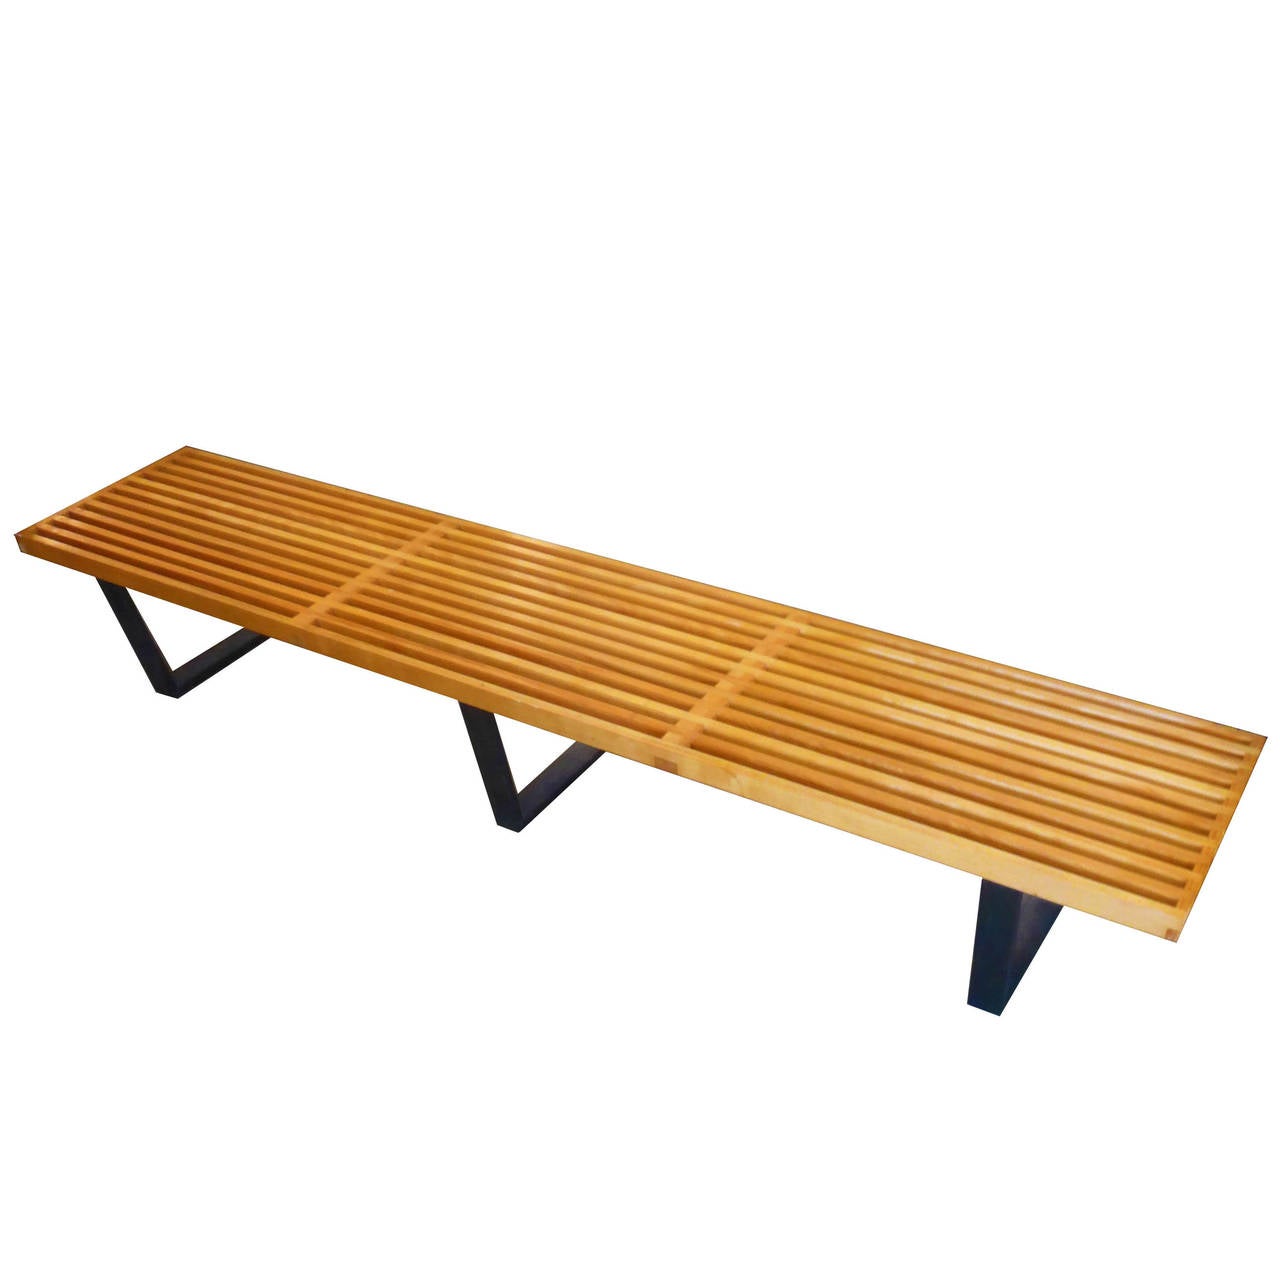 This is the second longest size that the Classic Nelson bench was made in. It is completely original with a great patina and barely any wear from age. It is strong and sturdy and extremely beautiful in this size.